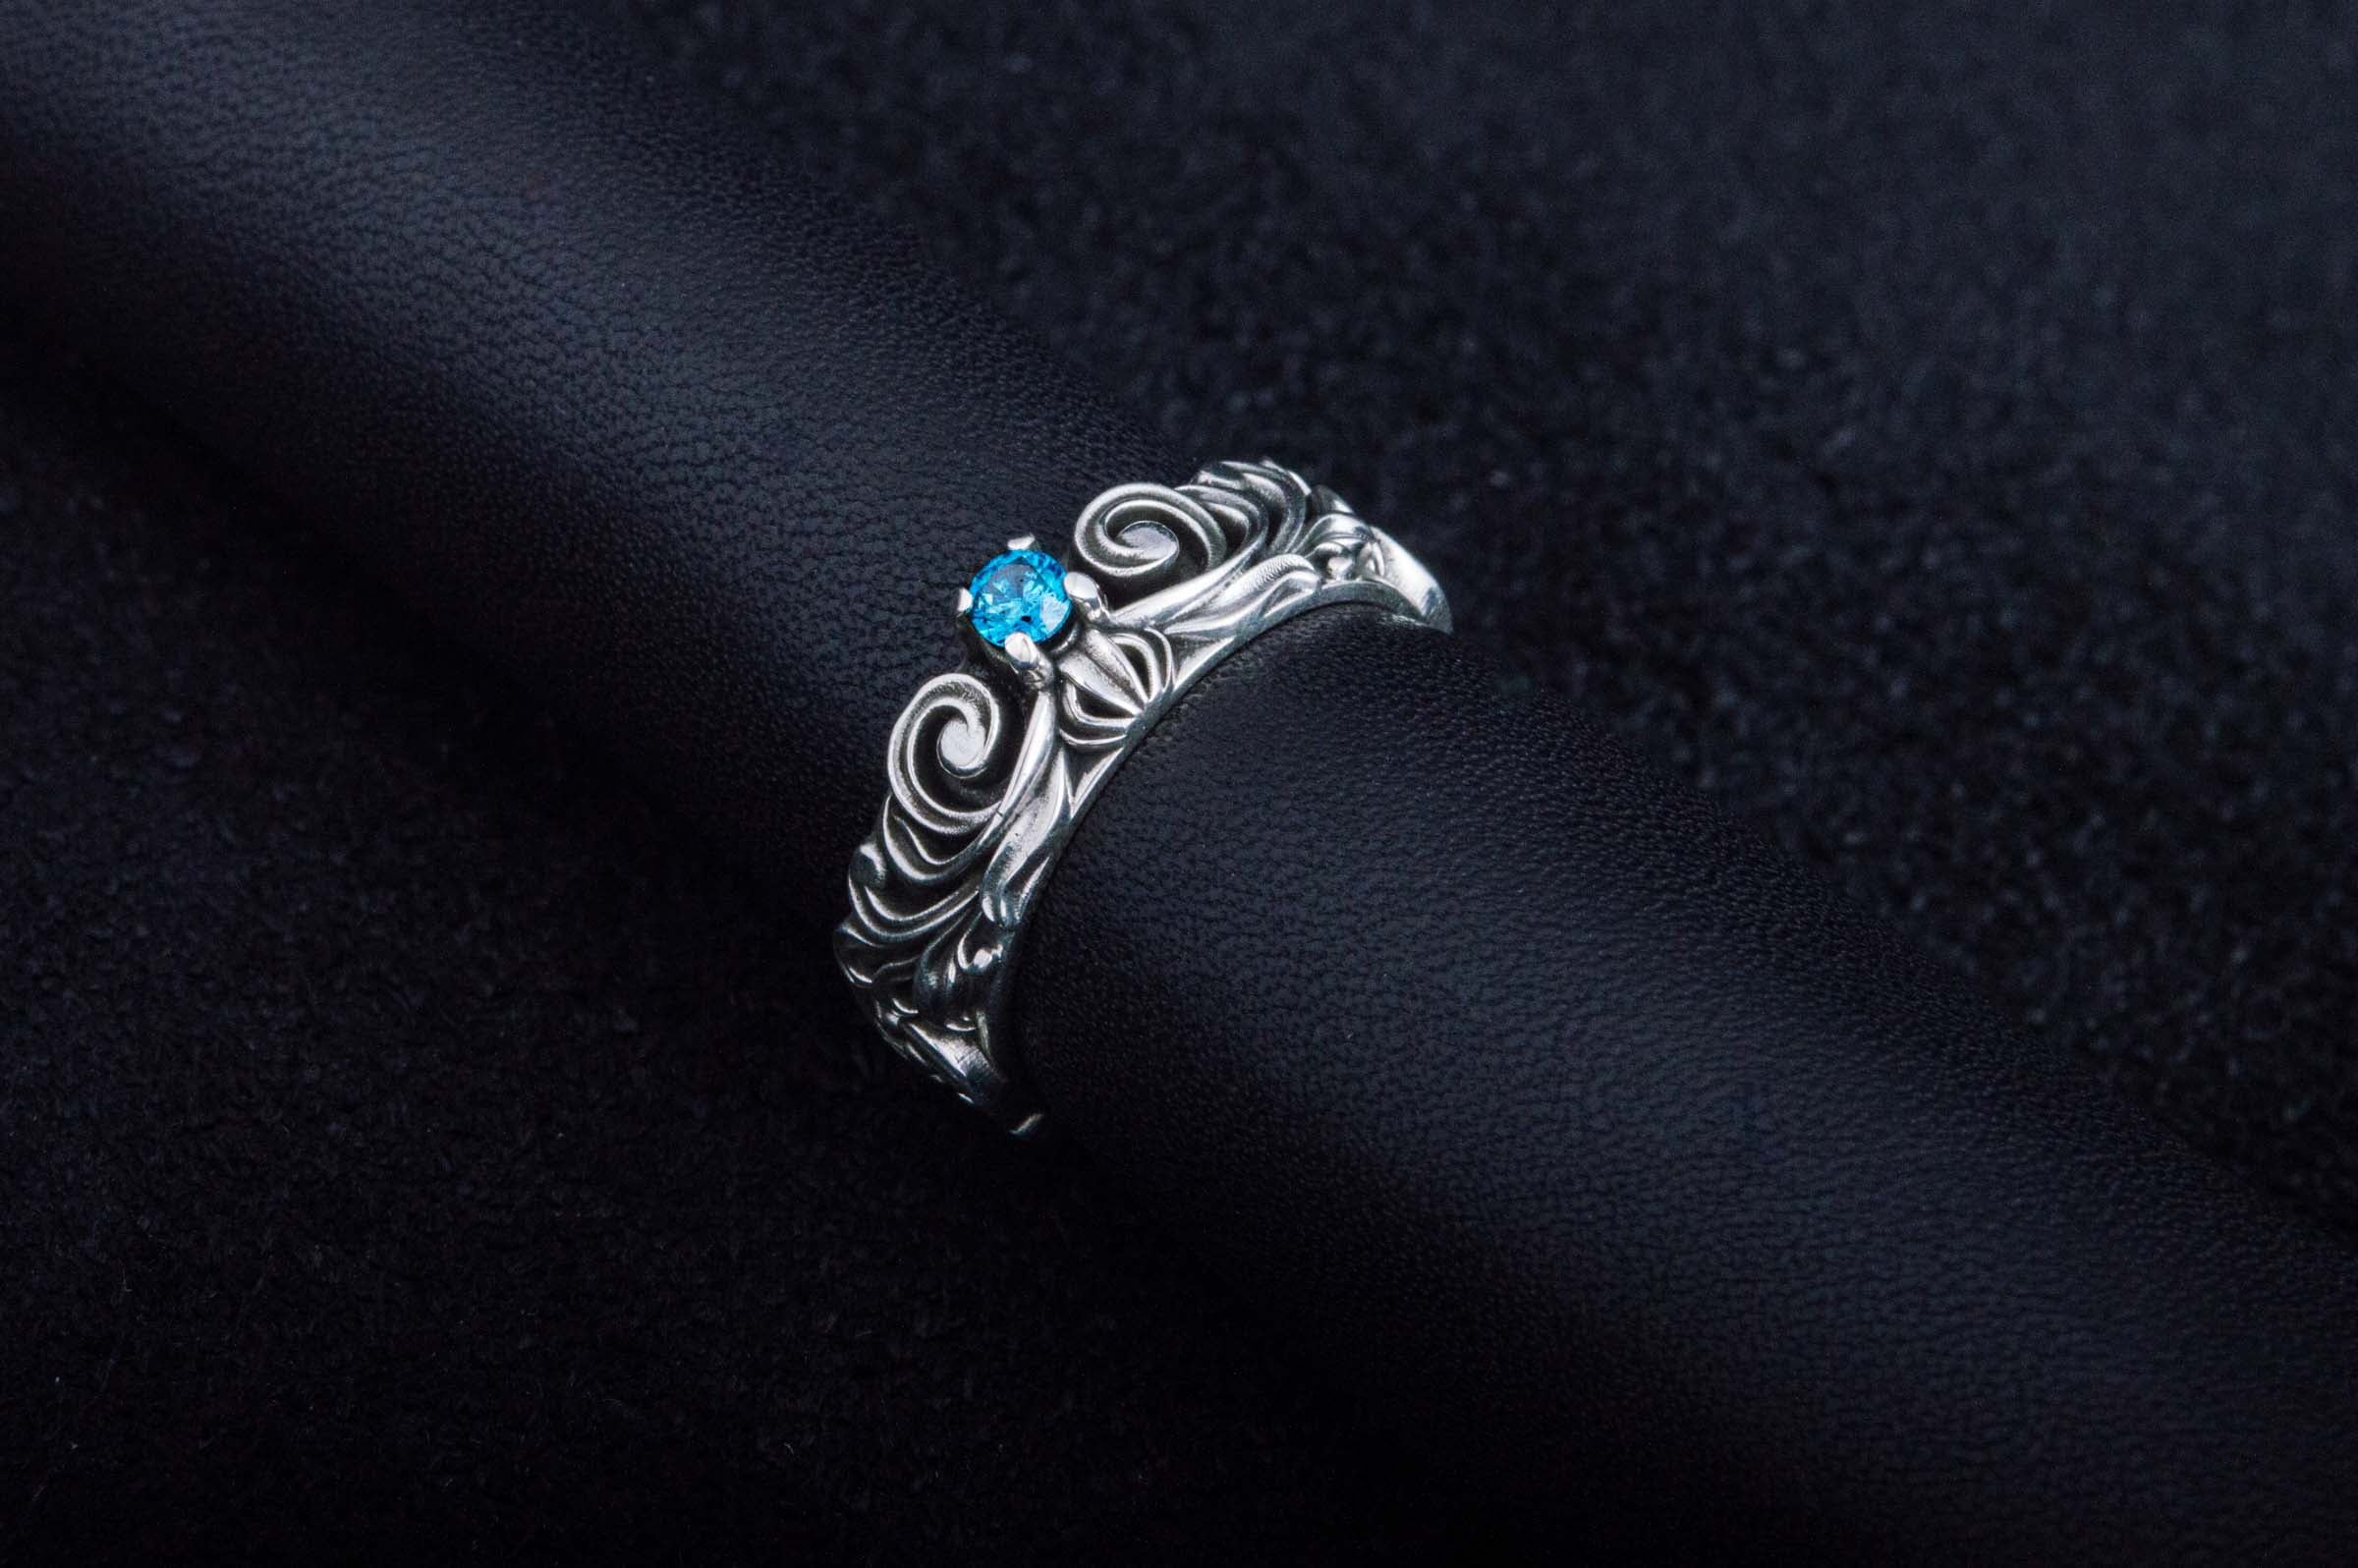 Handmade Fashion RIng with Blue Cubic Zirconia Sterling Silver Jewelry - vikingworkshop